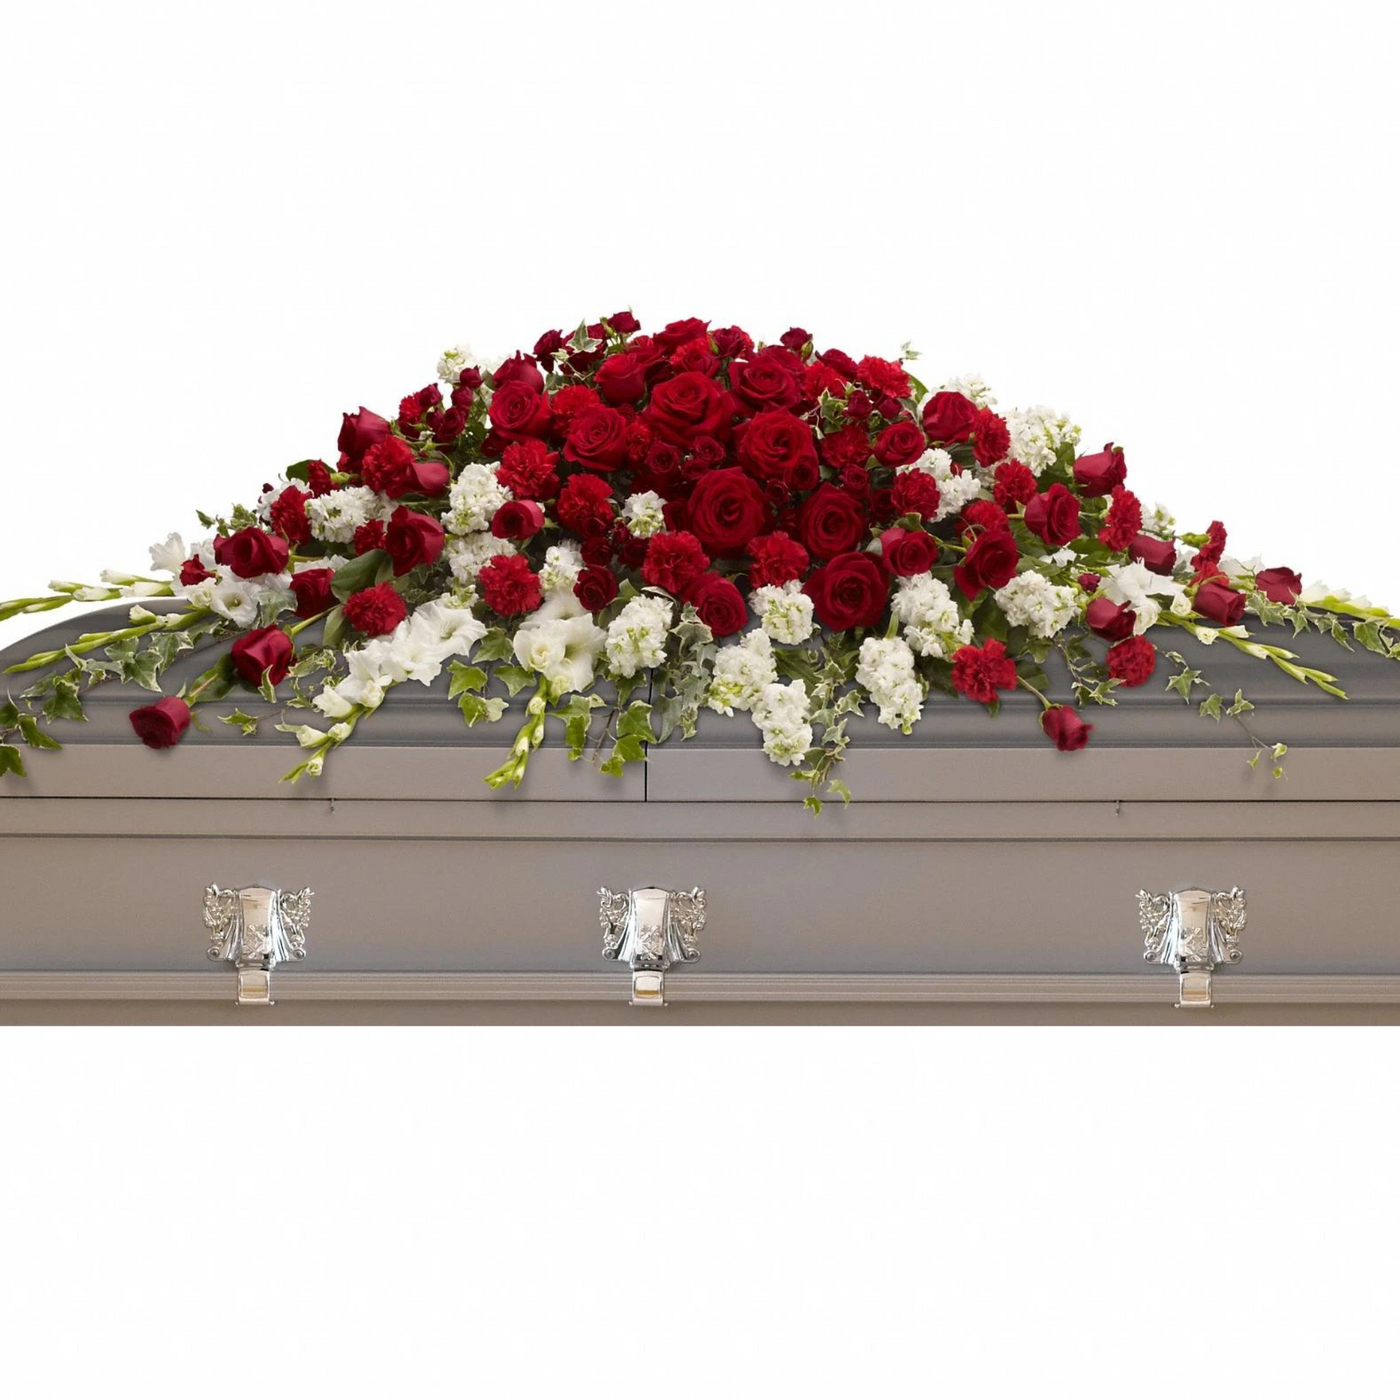 Red and White Casket Funeral Flowers